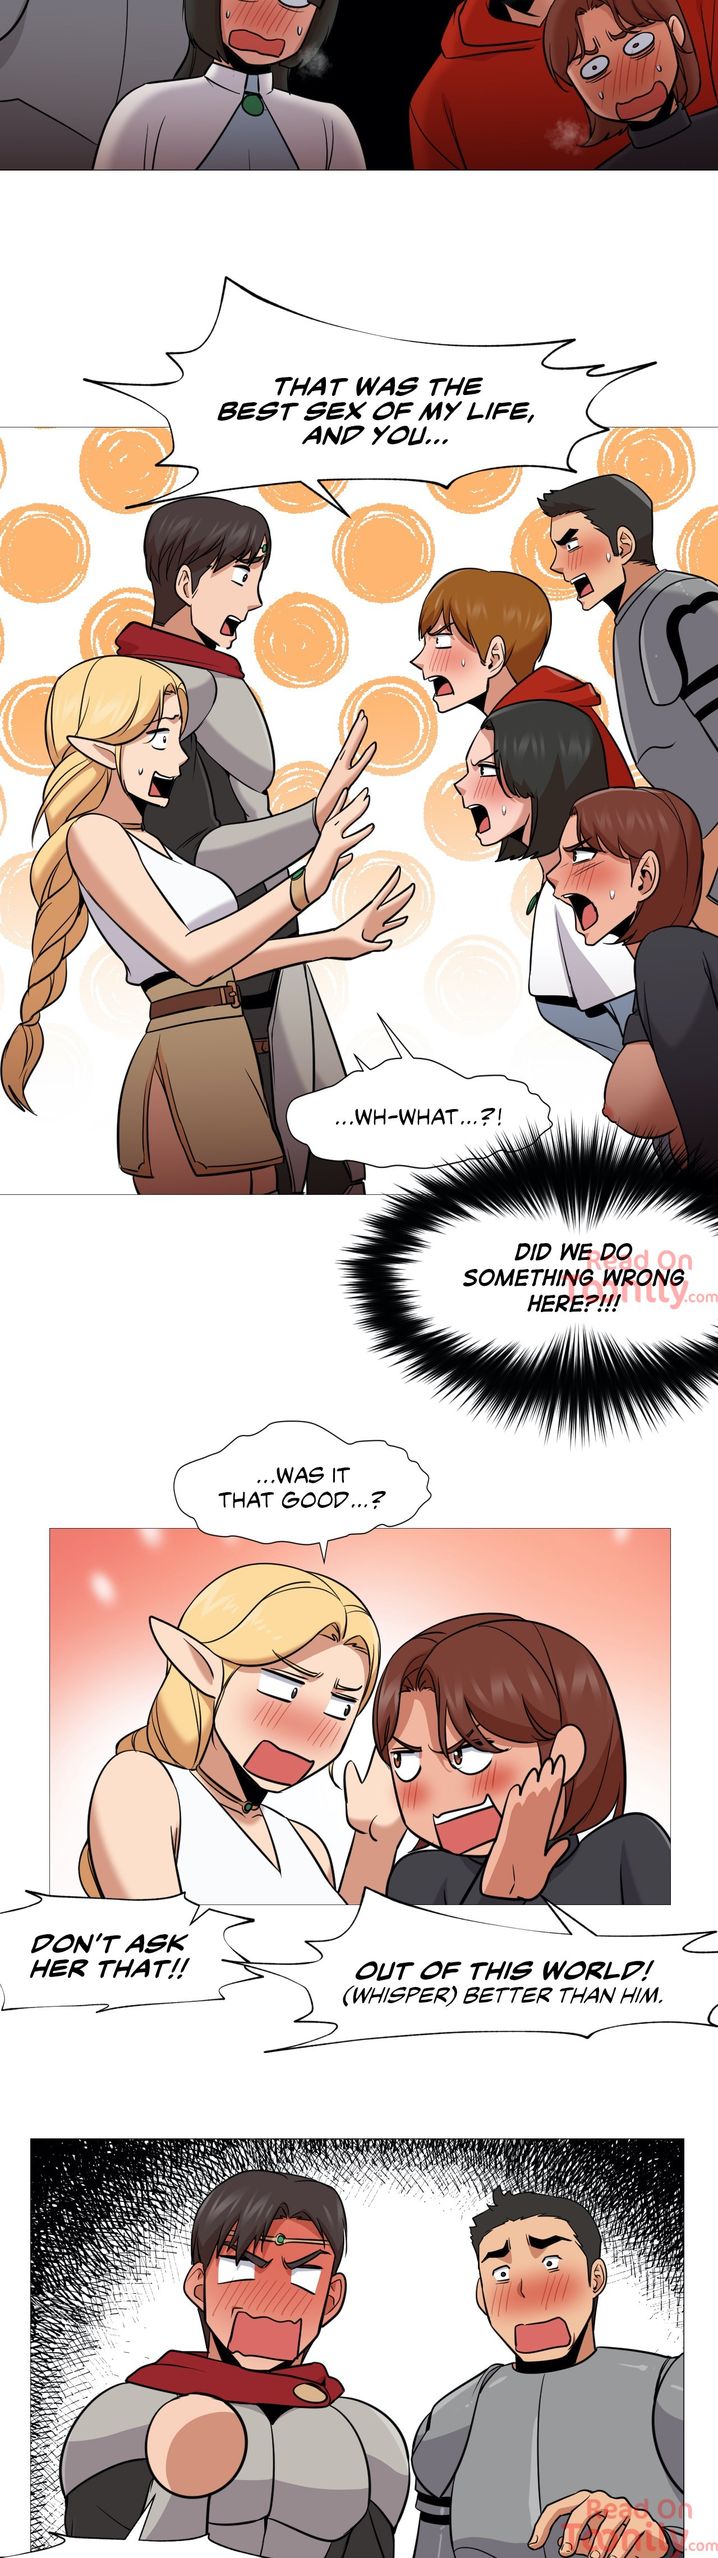 Man Up, Girl! - Chapter 37 Page 10